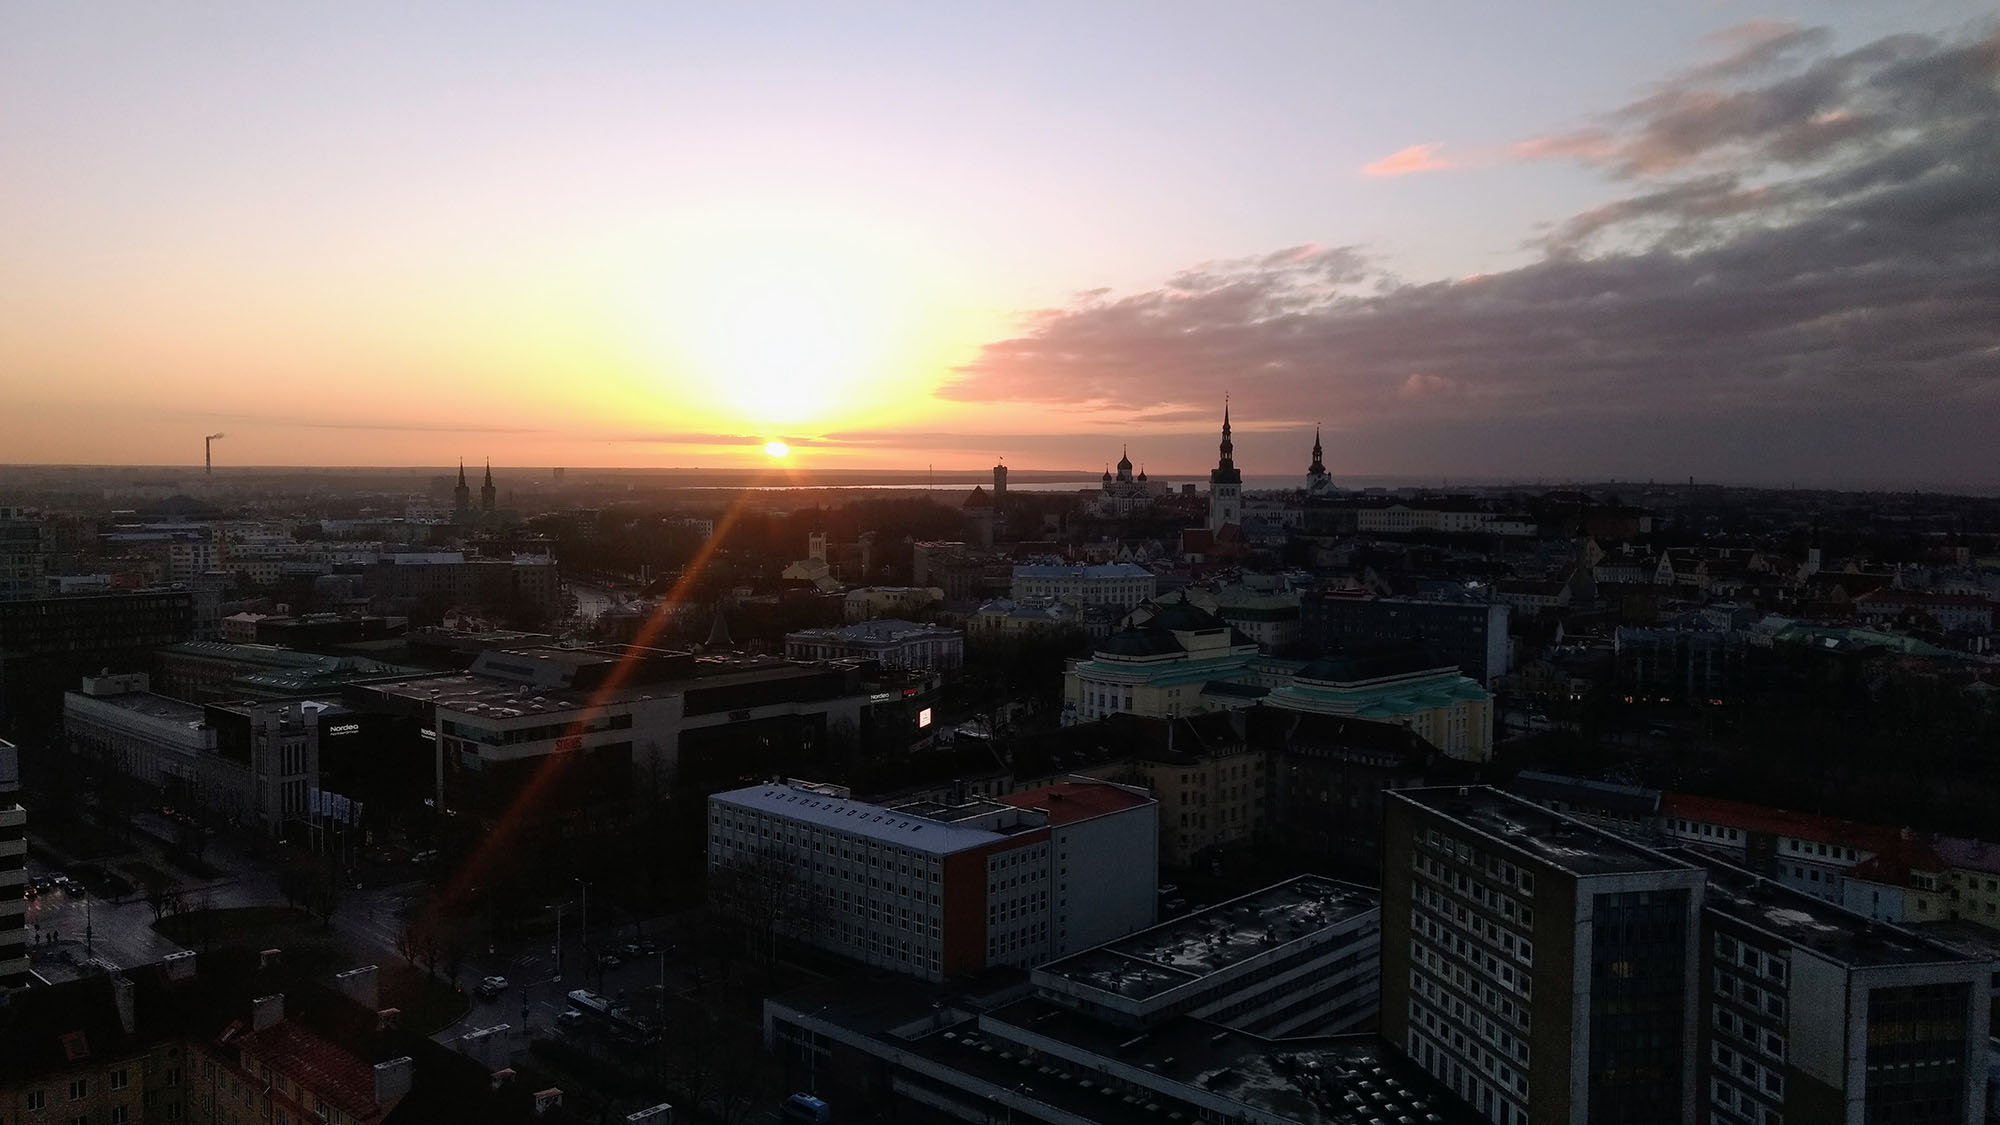 Lessons from Estonia: E-Government, Digital Identity, Health, IoT and Startups